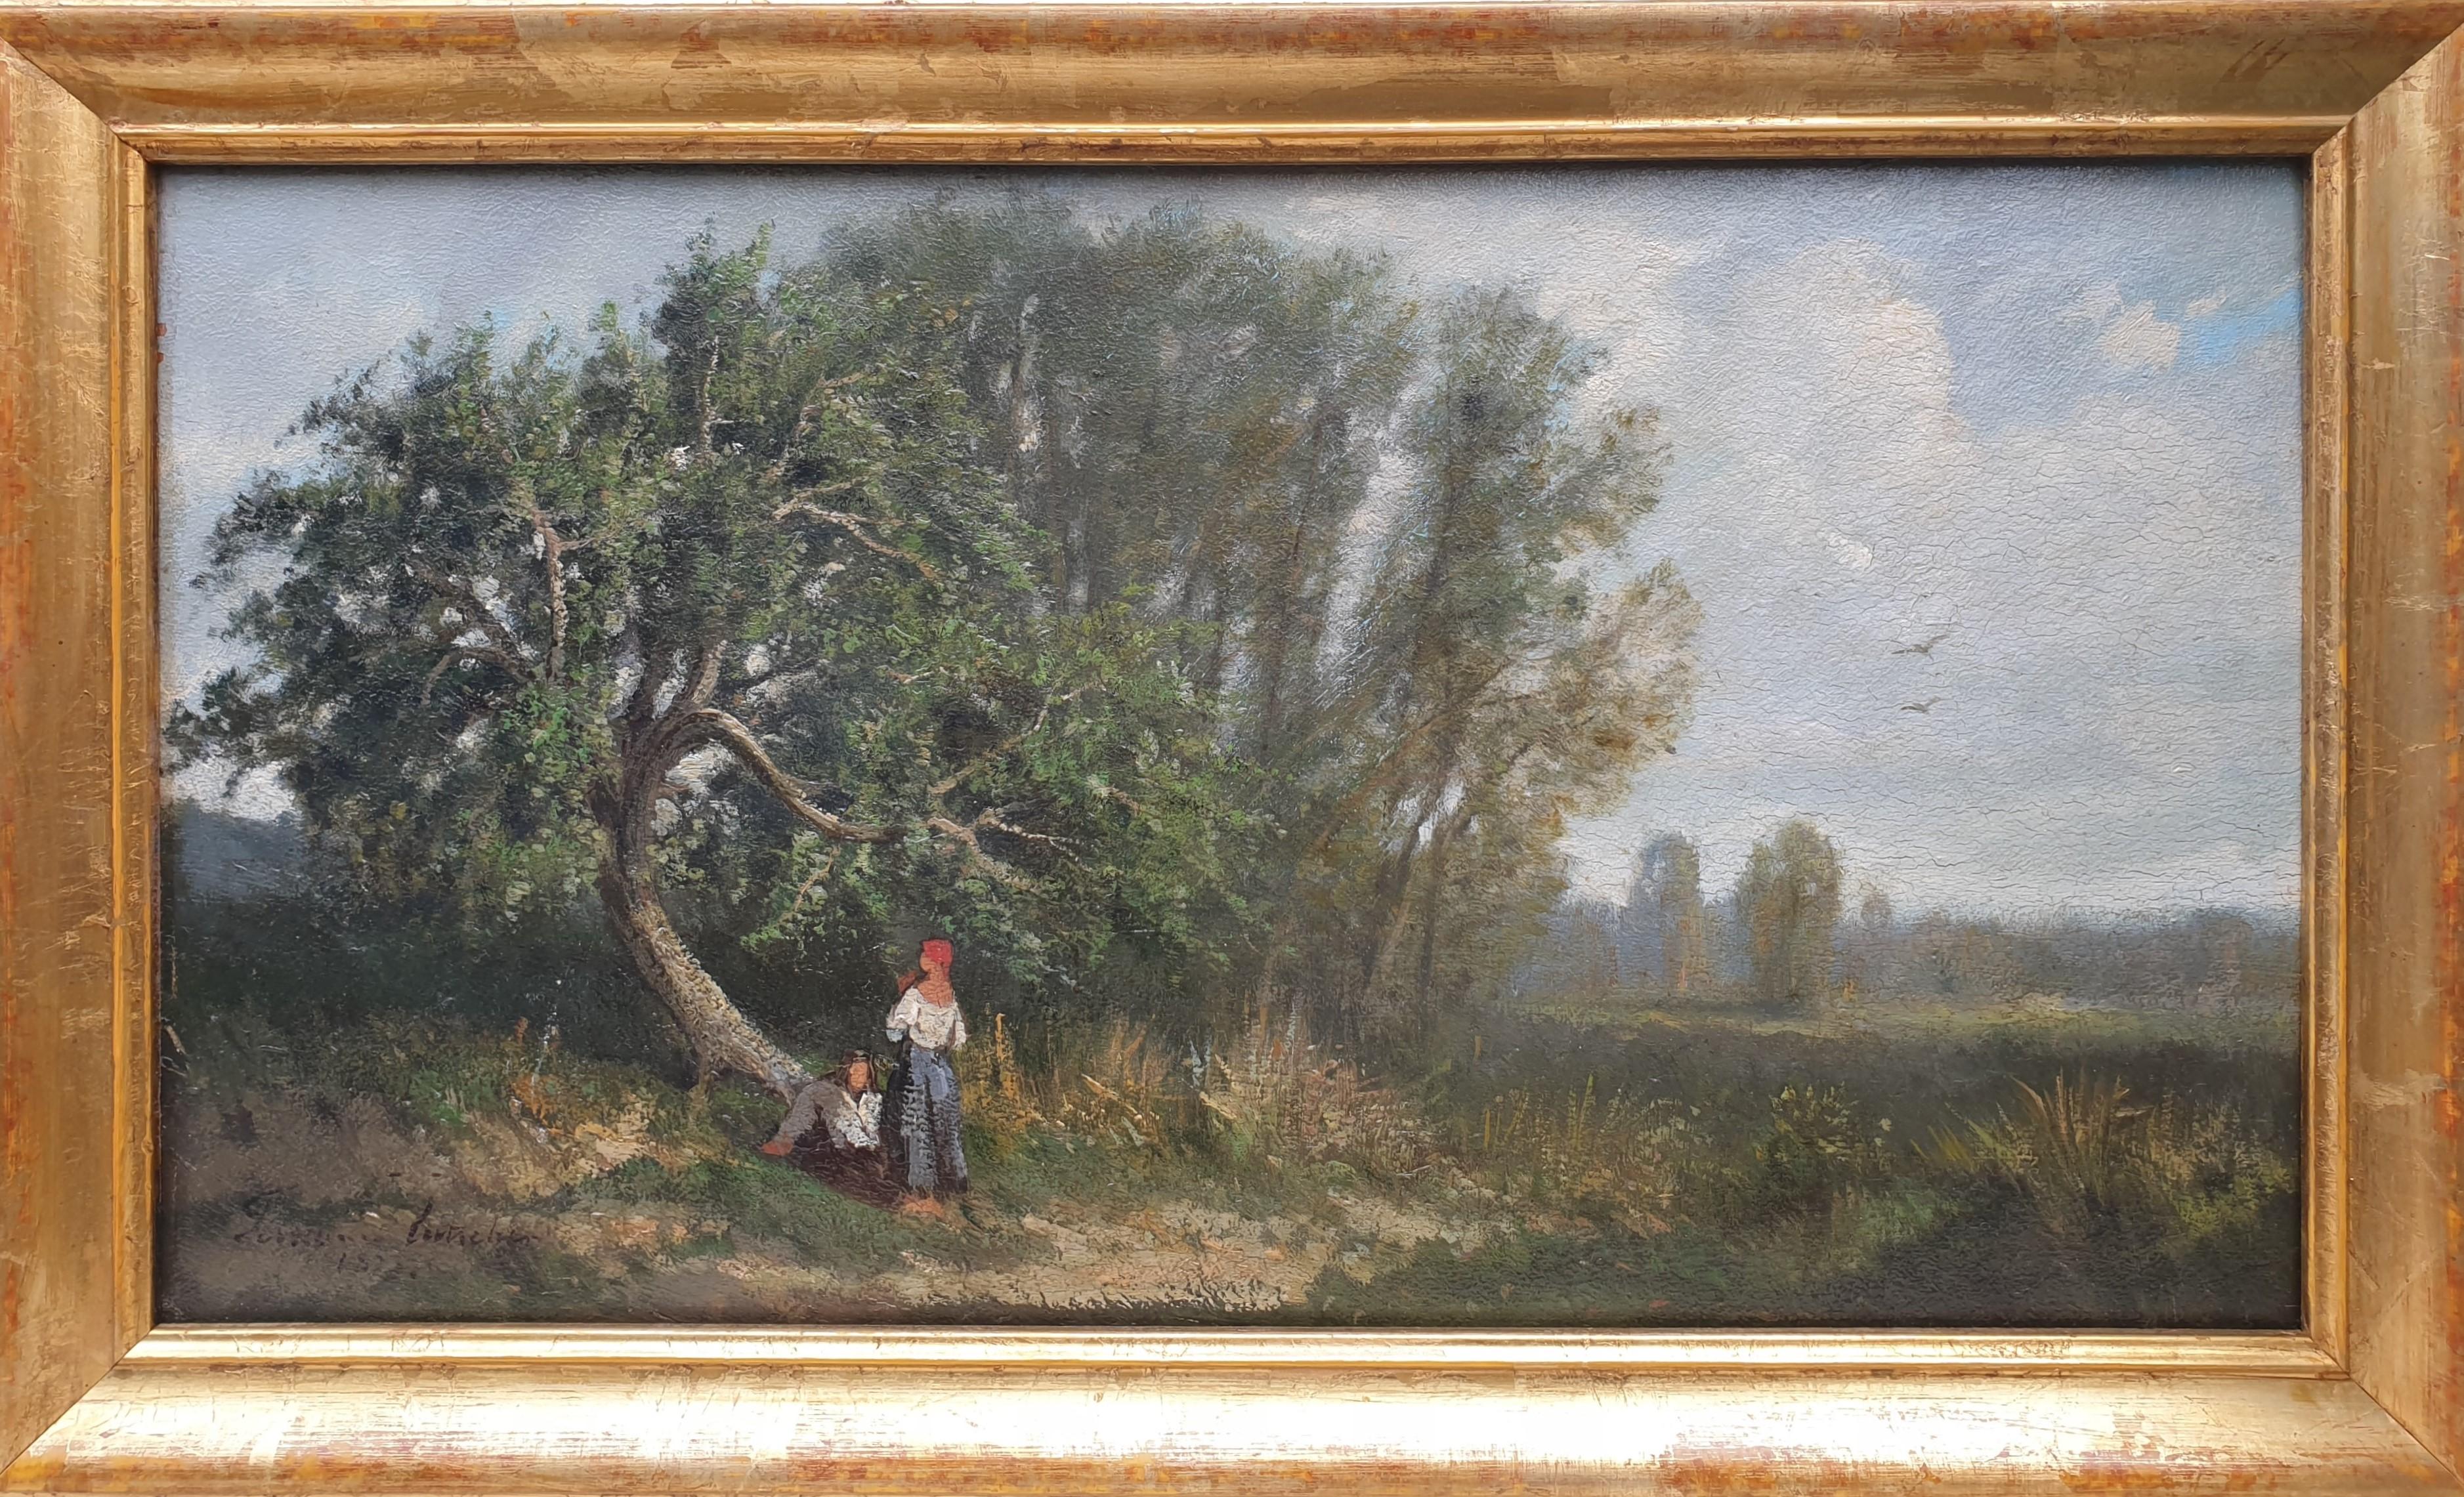 Fernand LUTSCHER Landscape Painting - French landscape painting near Angers France 19th barbizon Oil on panel wood